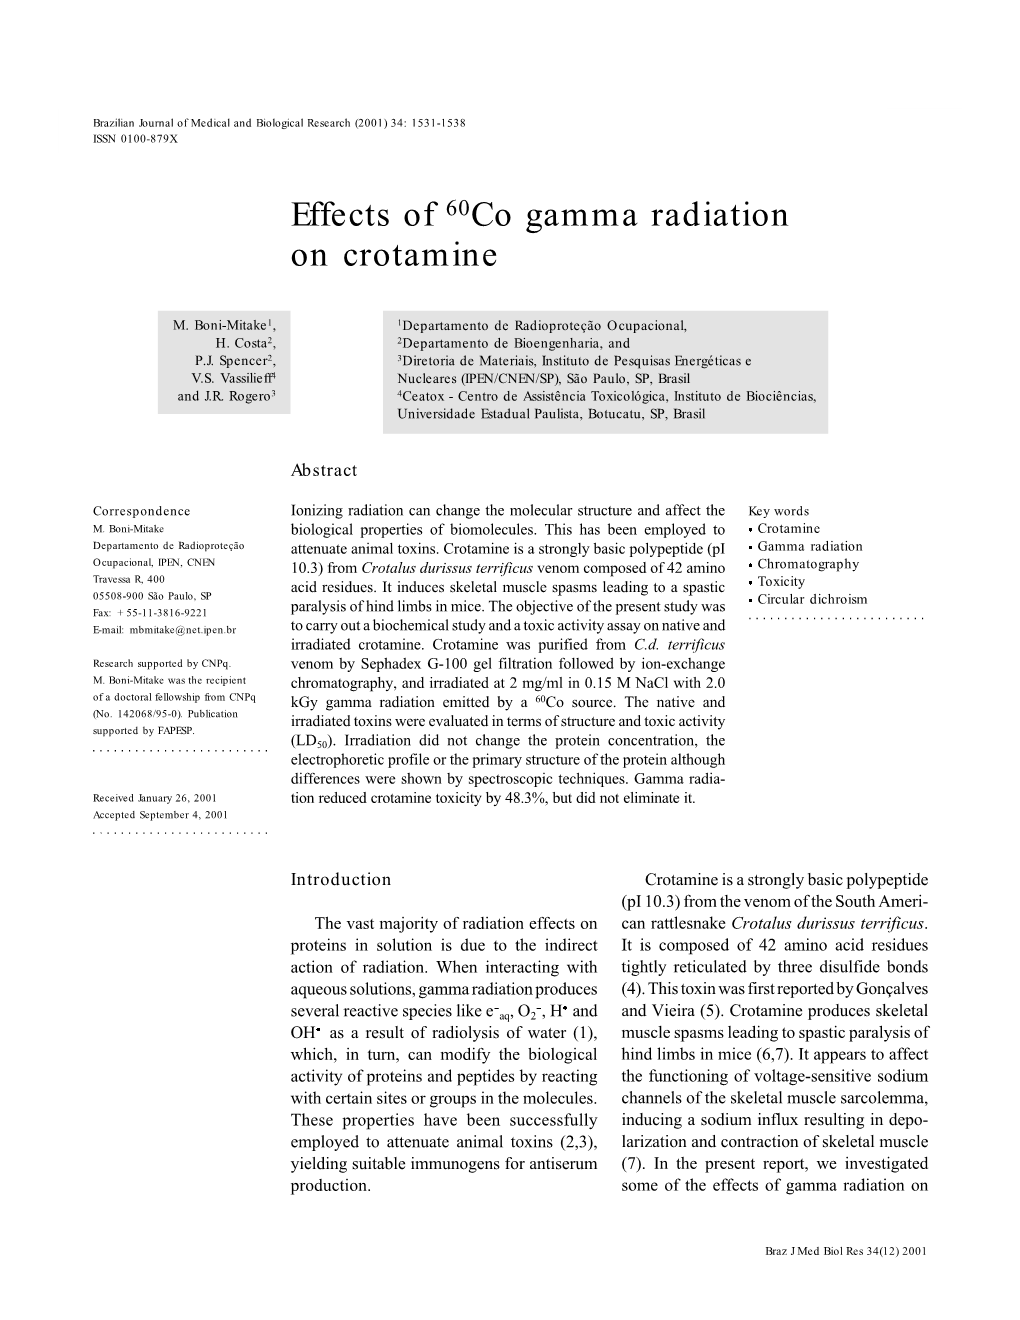 Effects of 60Co Gamma Radiation on Crotamine